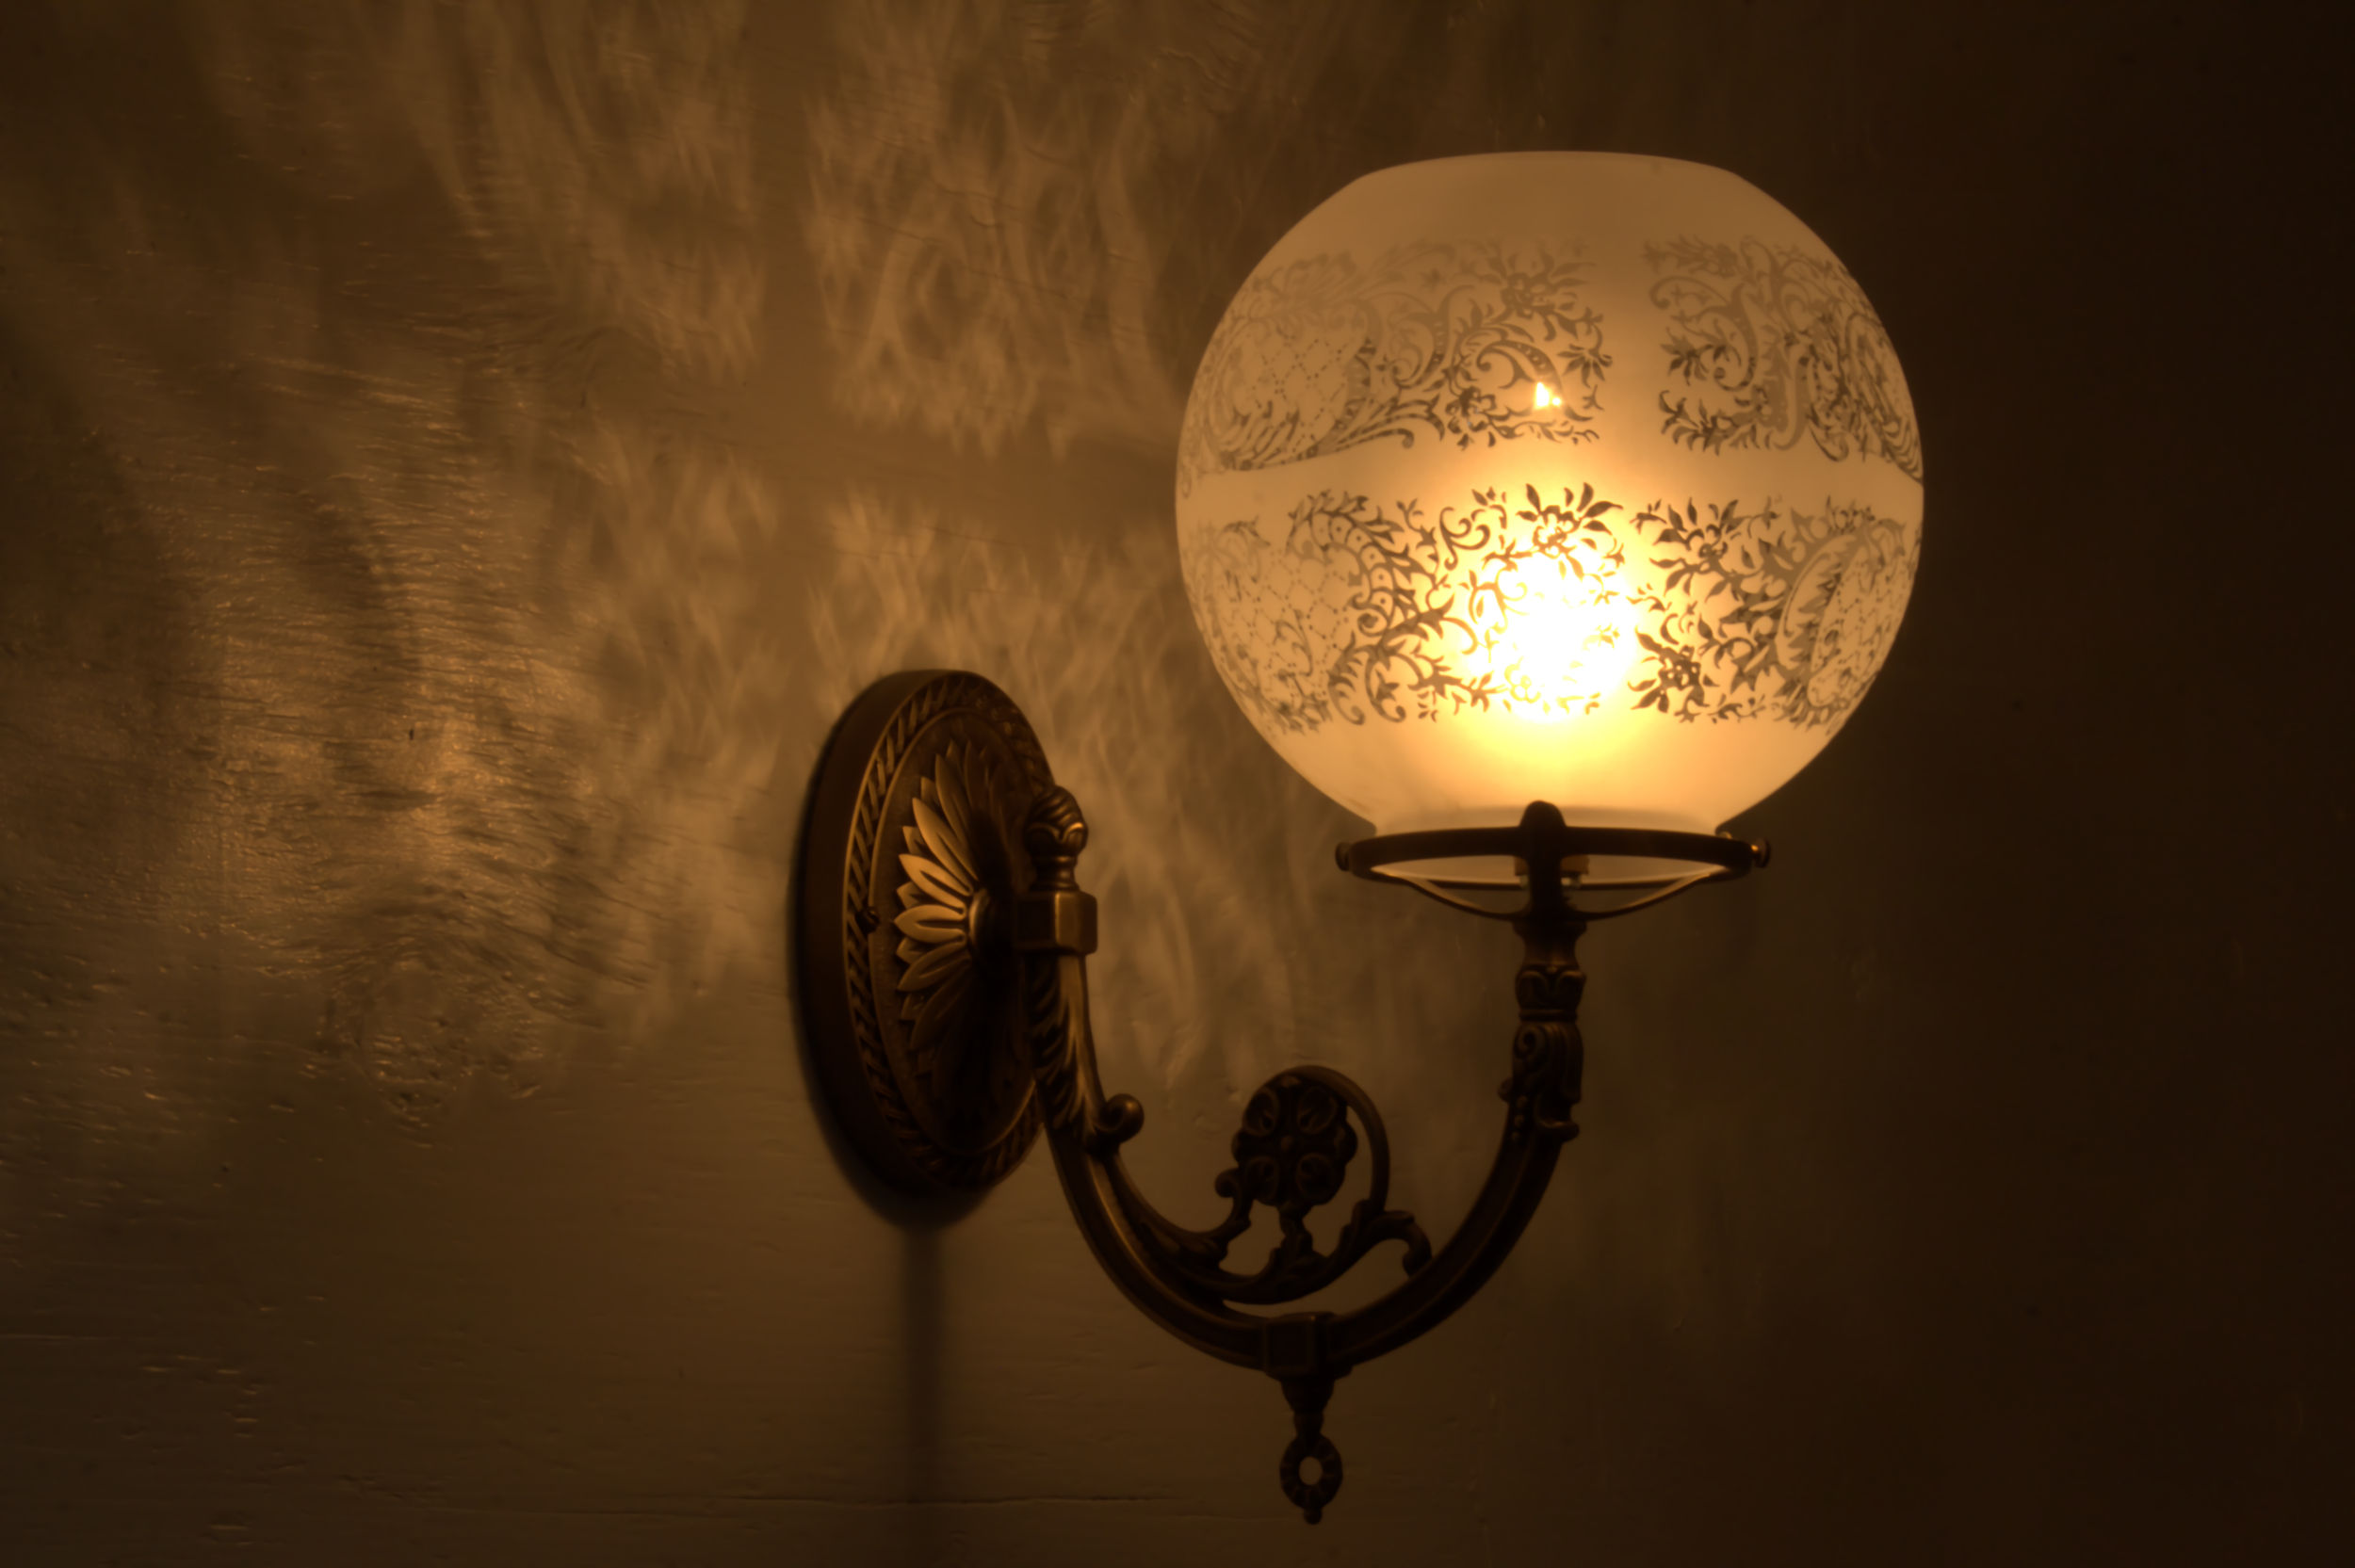 https://lanternnet.com/wp-content/uploads/W_T_Kirkman_Lanterns_Humboldt_Gas_Wall_Electric_Lamp_With_8_Inch_Satin_Etched_Ball_Shade.jpg